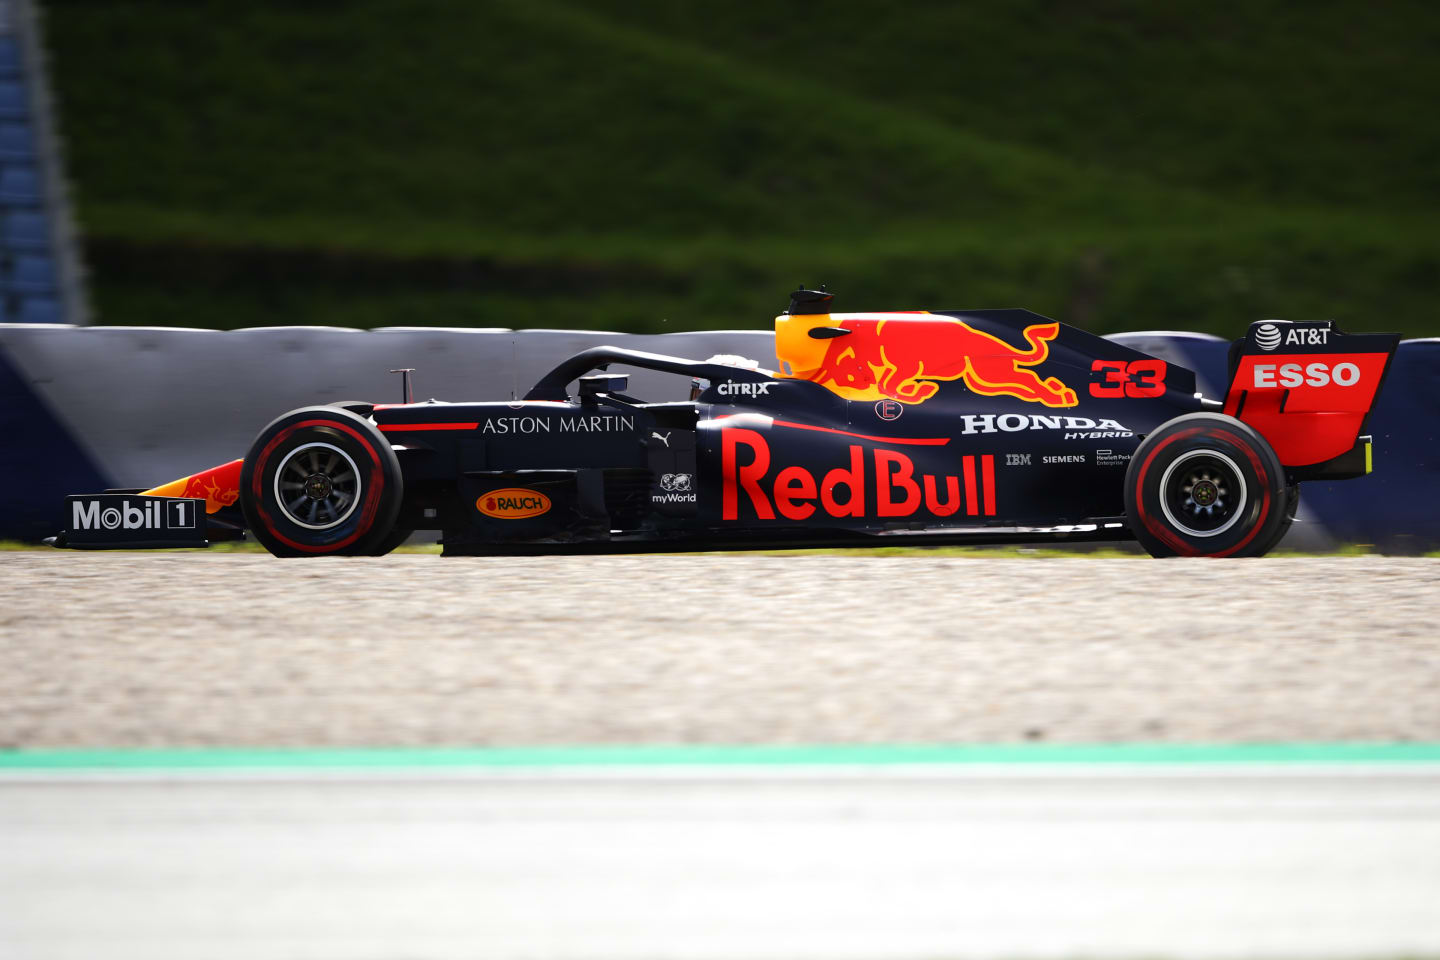 SPIELBERG, AUSTRIA - JULY 03: Max Verstappen of the Netherlands driving the (33) Aston Martin Red Bull Racing RB16 on track during practice for the F1 Grand Prix of Austria at Red Bull Ring on July 03, 2020 in Spielberg, Austria. (Photo by Bryn Lennon/Getty Images)